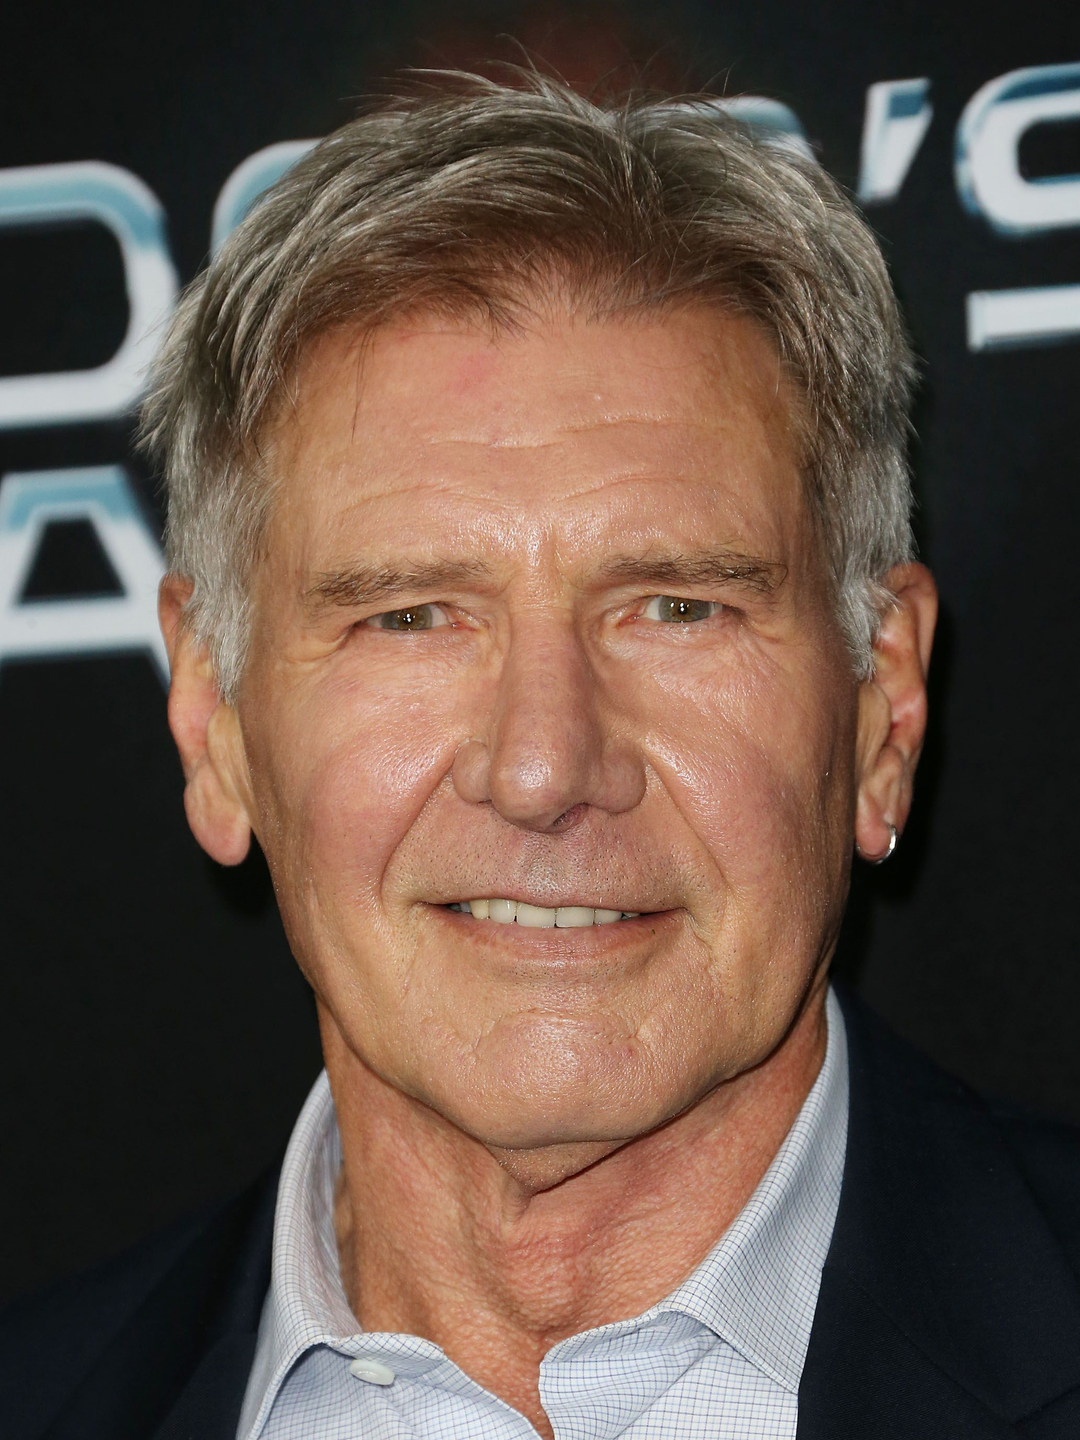 Harrison Ford how old is he